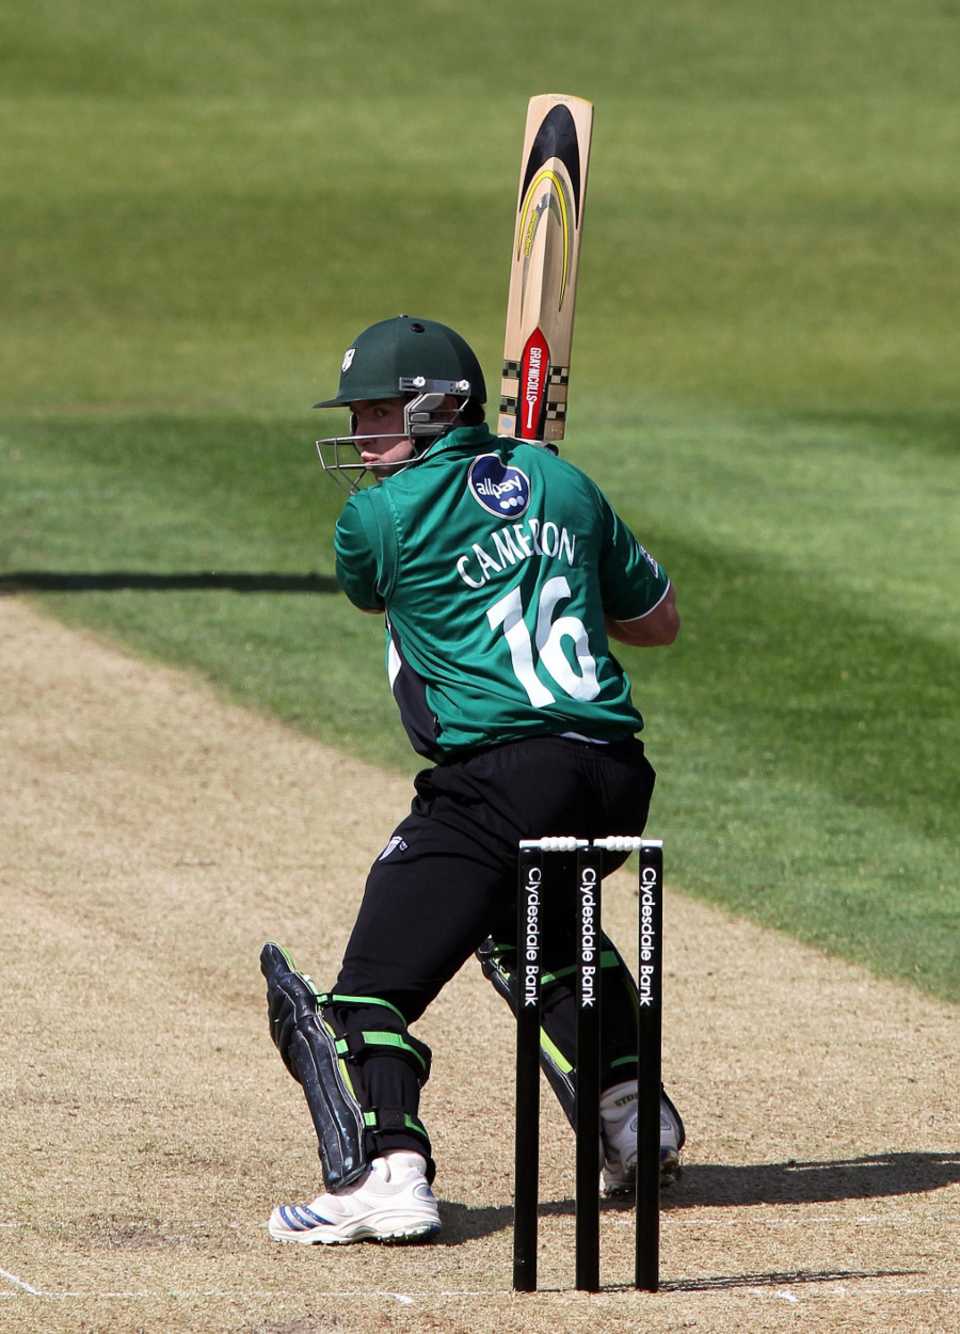 James Cameron was the only Worcestershire batsman to impress with 69